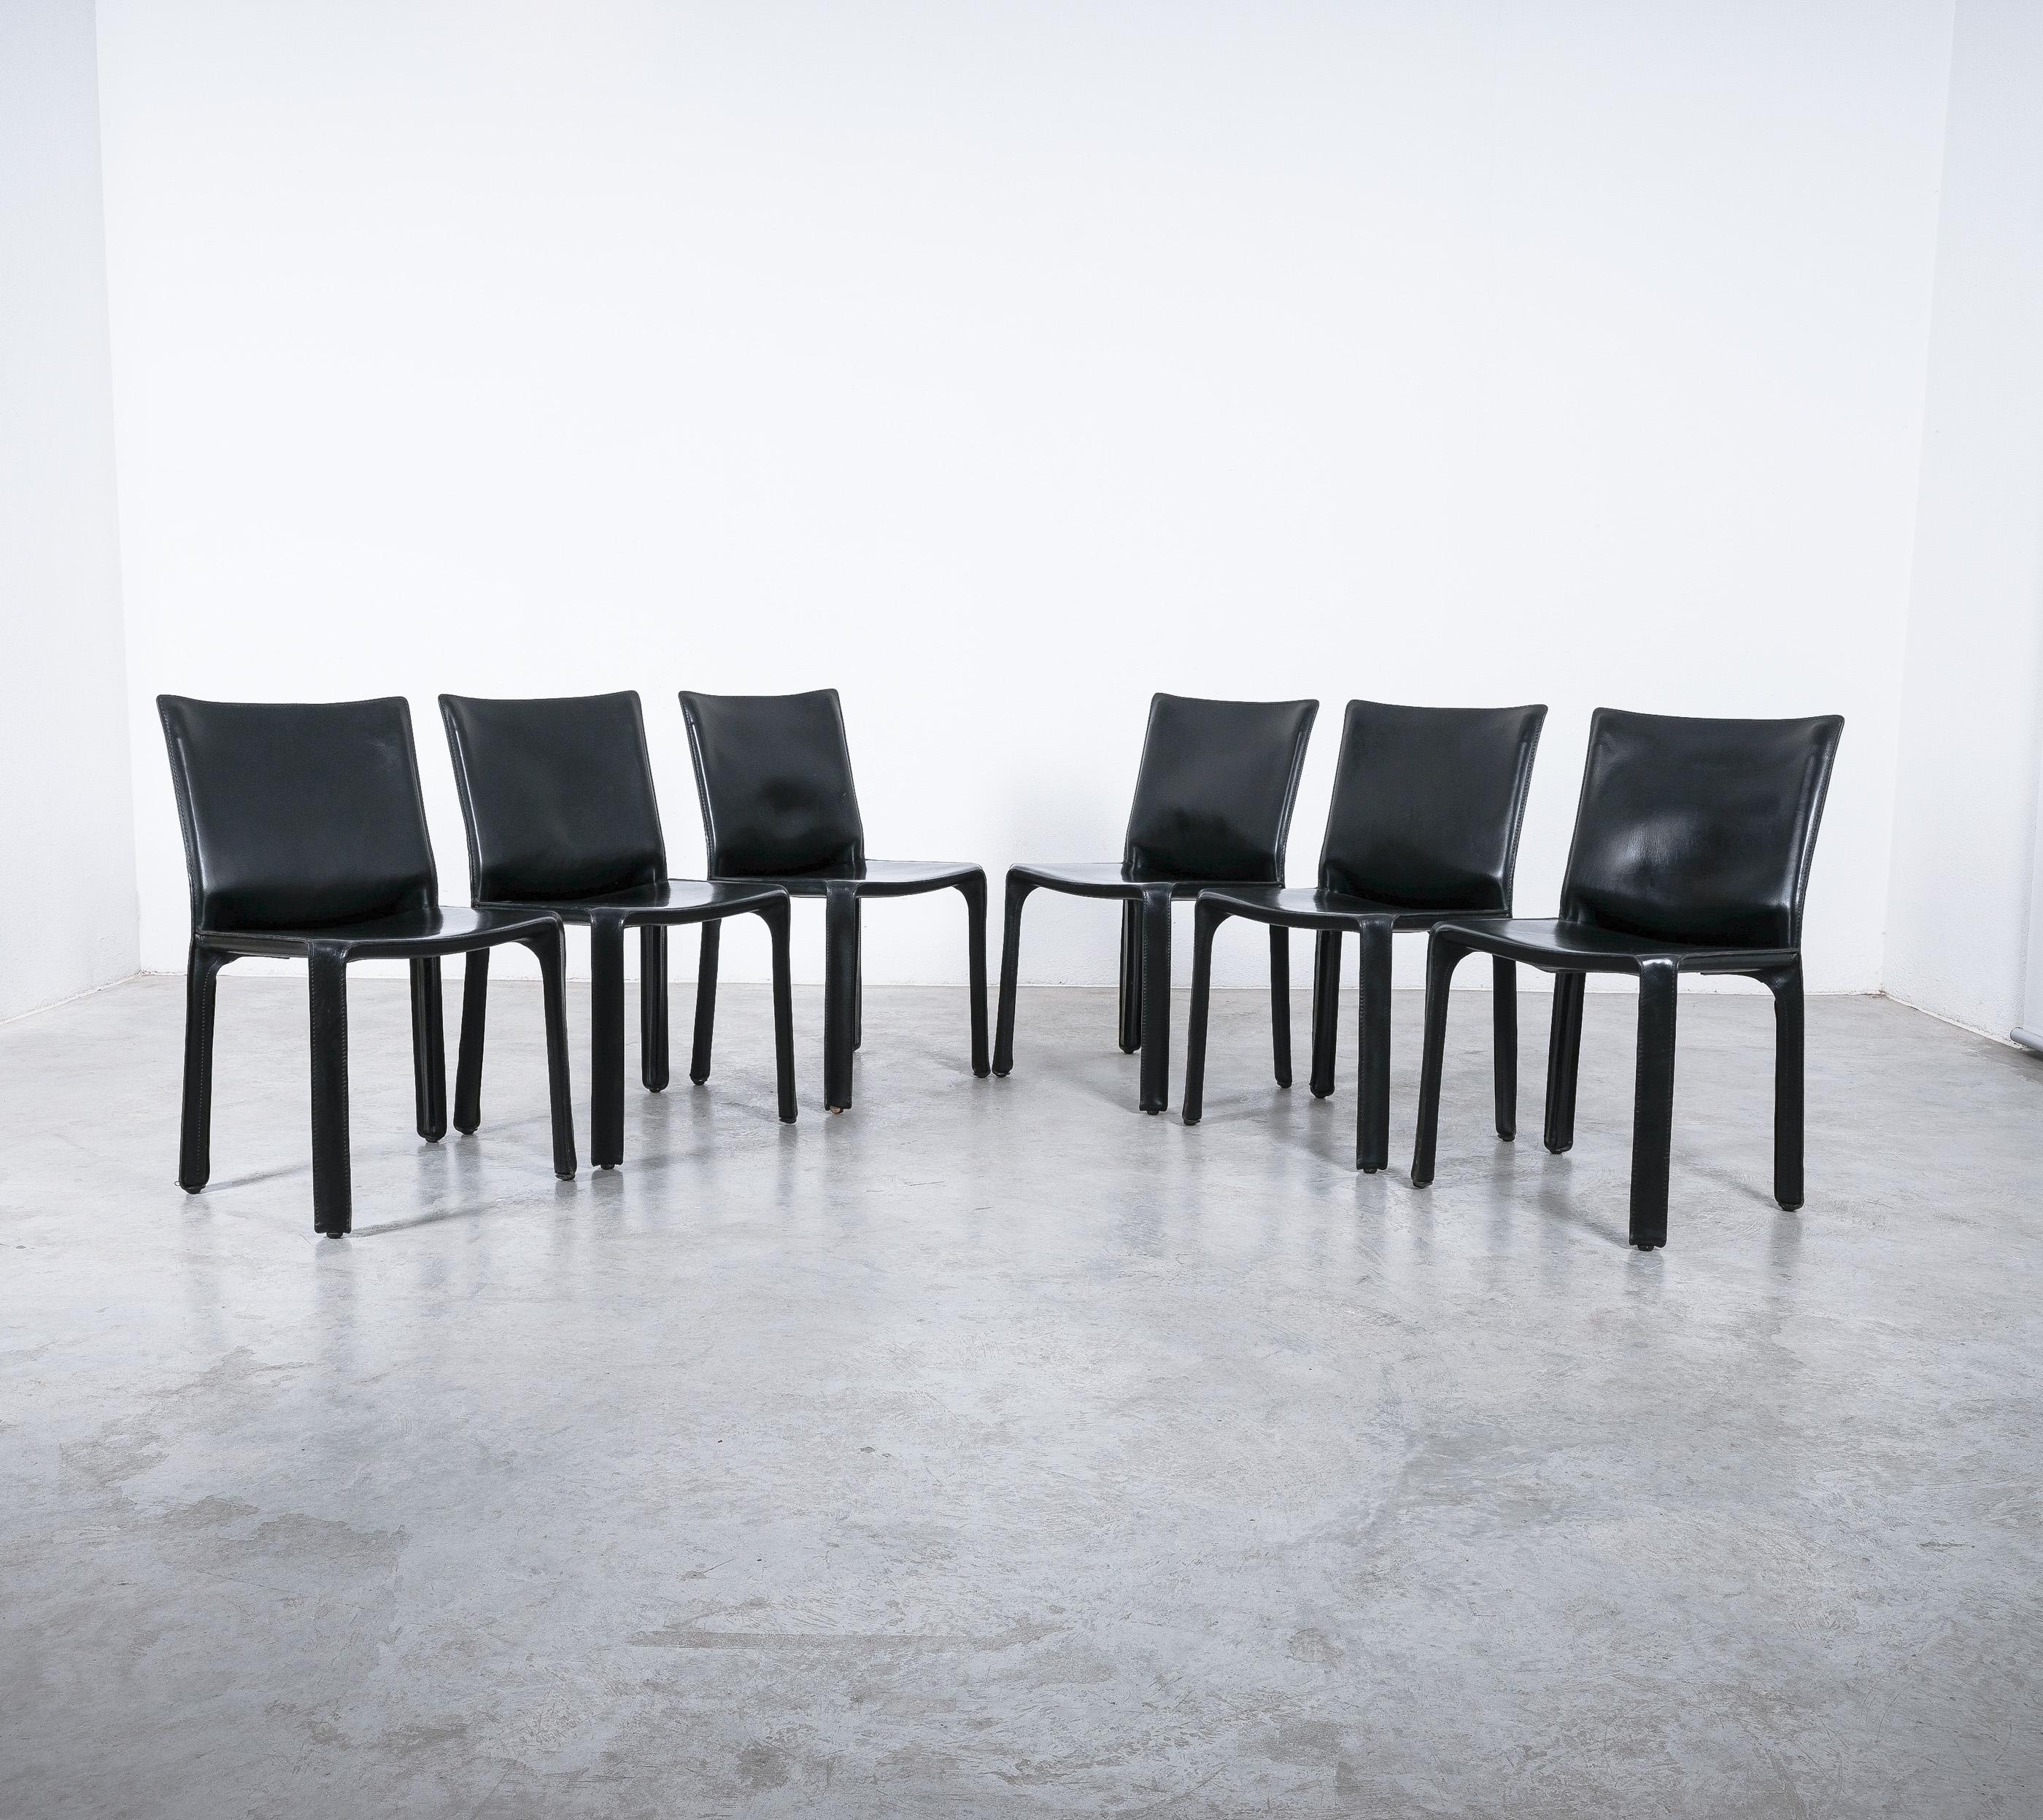 Wonderful set of 8 dining chairs by Mario Bellini 1980's; 2x cab 413 and 6x cab 412 by - They are early versions from the 1980's and in very good condition.

A set of eight Italian design icons in black saddle leather, the CAB 412/413 chair by